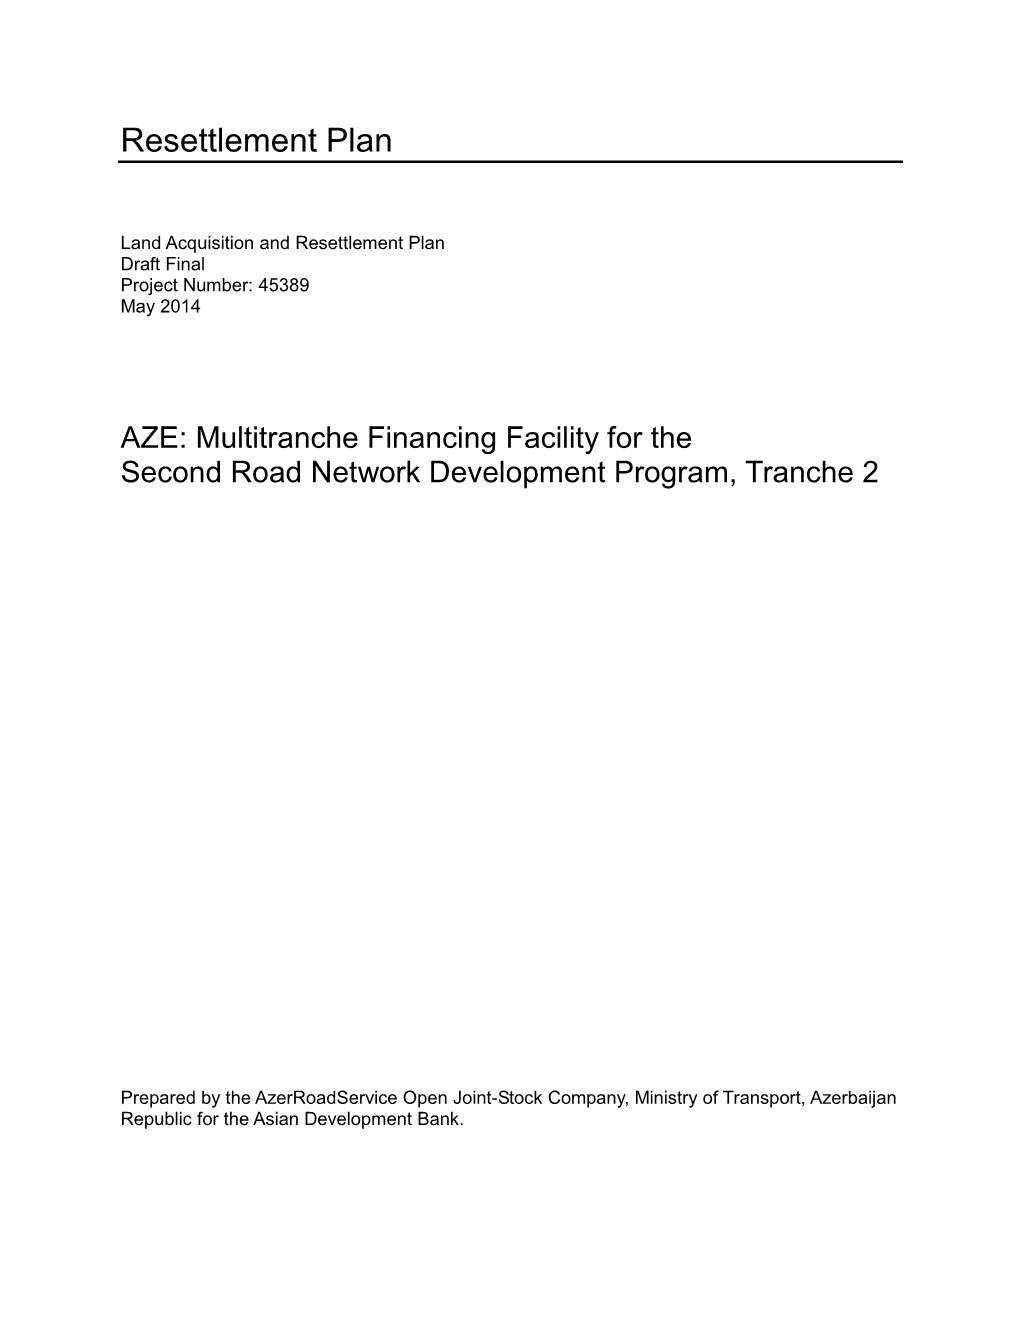 45389-004: Second Road Network Development Investment